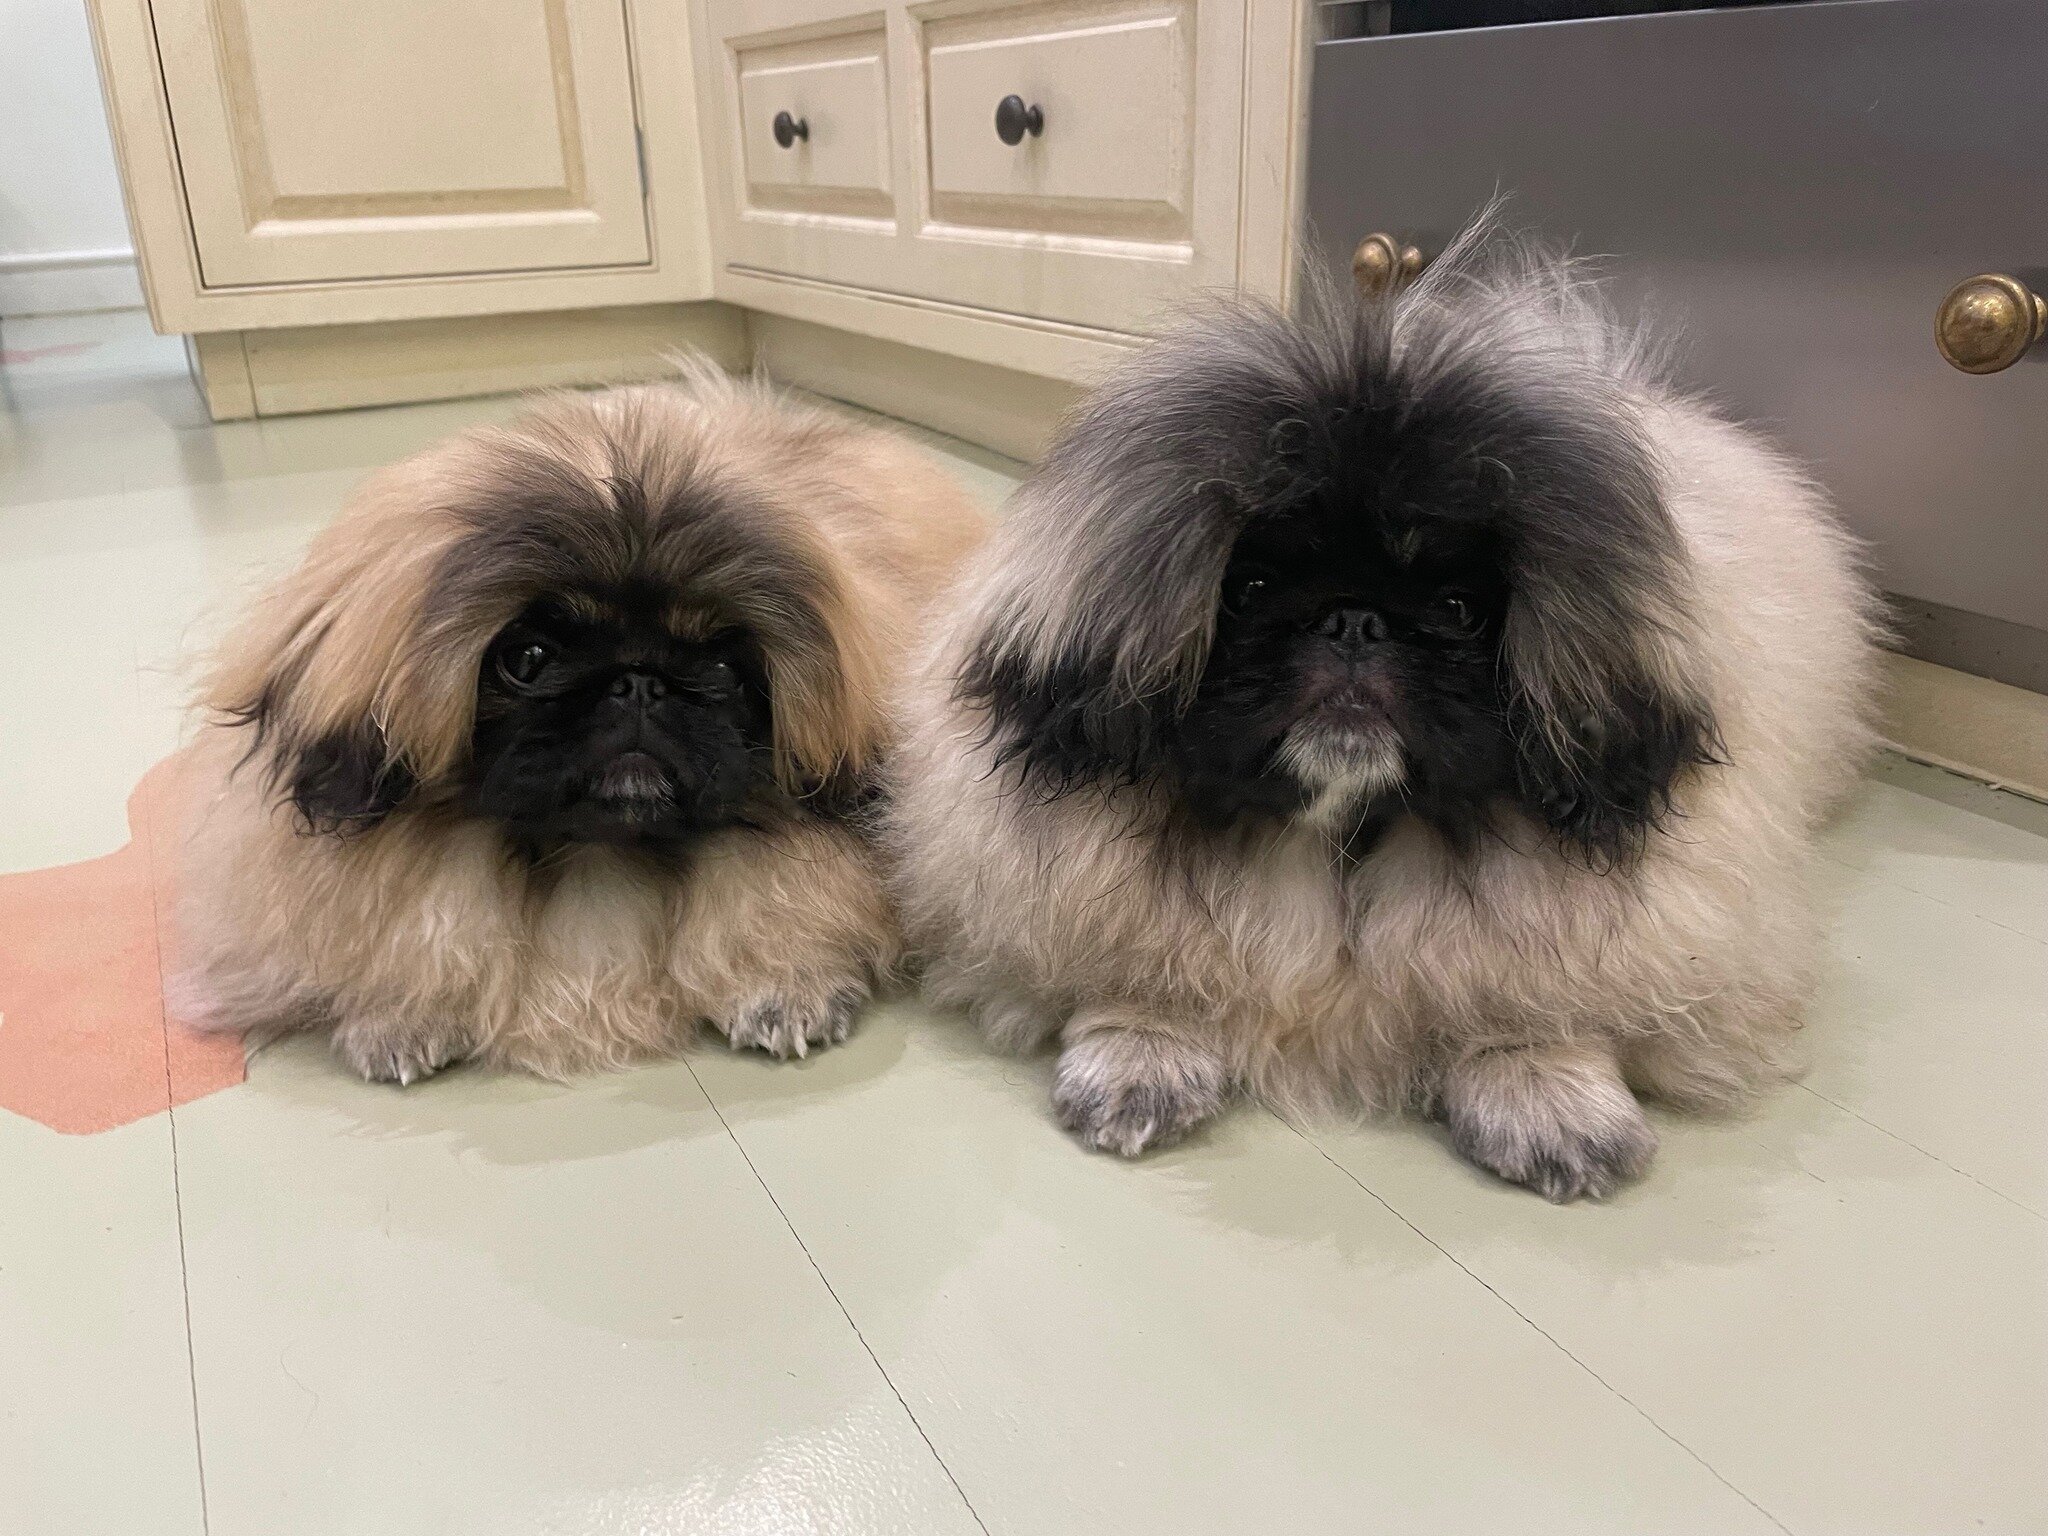 Meet my floofy friends! Super smart siblings Helga &amp; Glenda have aced their private puppy training and are now developing teen skills, I'm so proud of them! Stay tuned!
 #pekingesepuppy #pekingesepuppies #puppytraining #puppytraining101 #puppytra